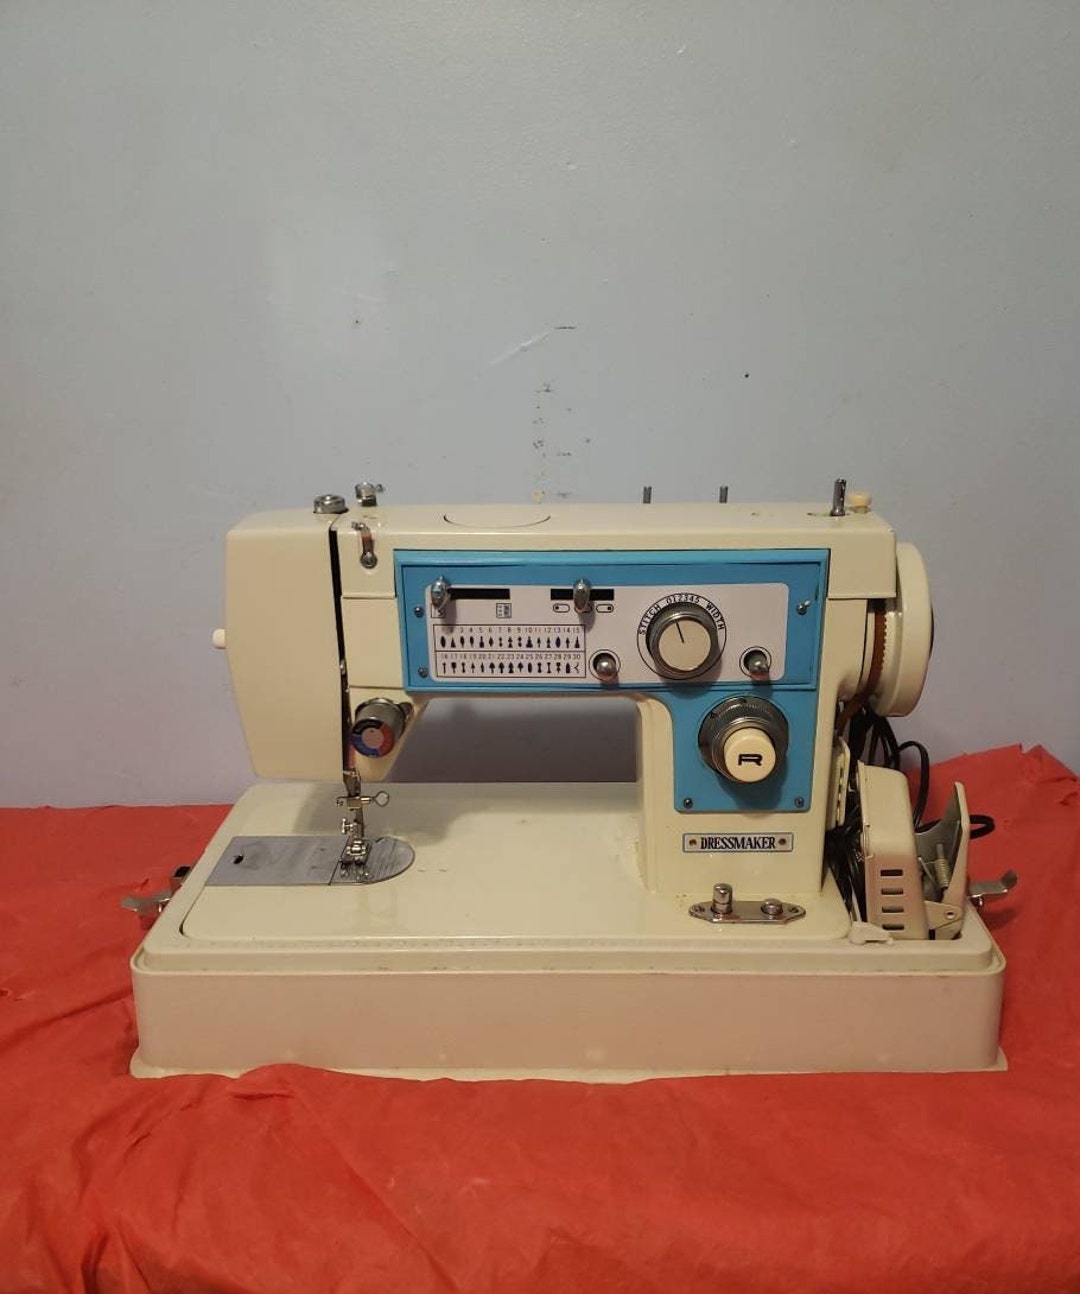 Vintage Kayser Sewing Machine, Rare Sewing Machine, Portable Sewing Machine  With Case and Key, Machine à Coudre Rétro. -  Israel